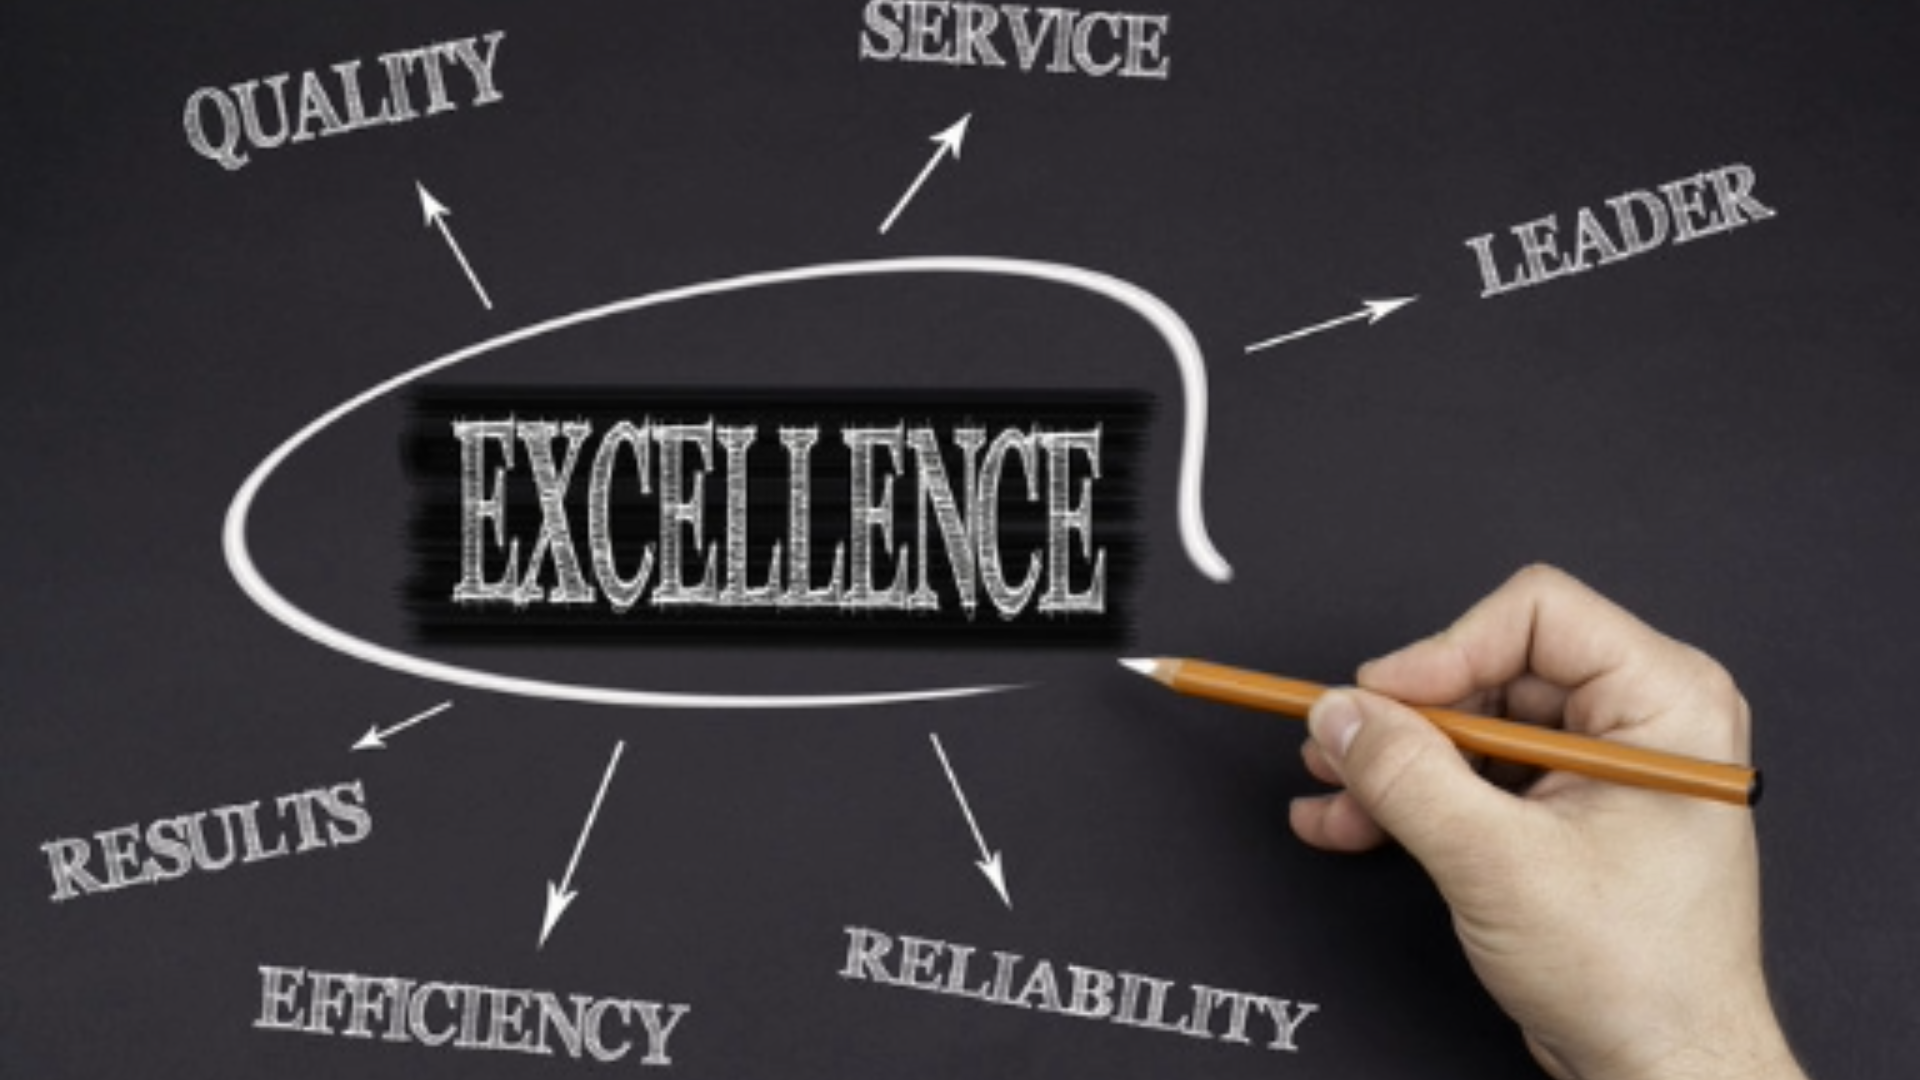 Achieving Excellence as a Standard